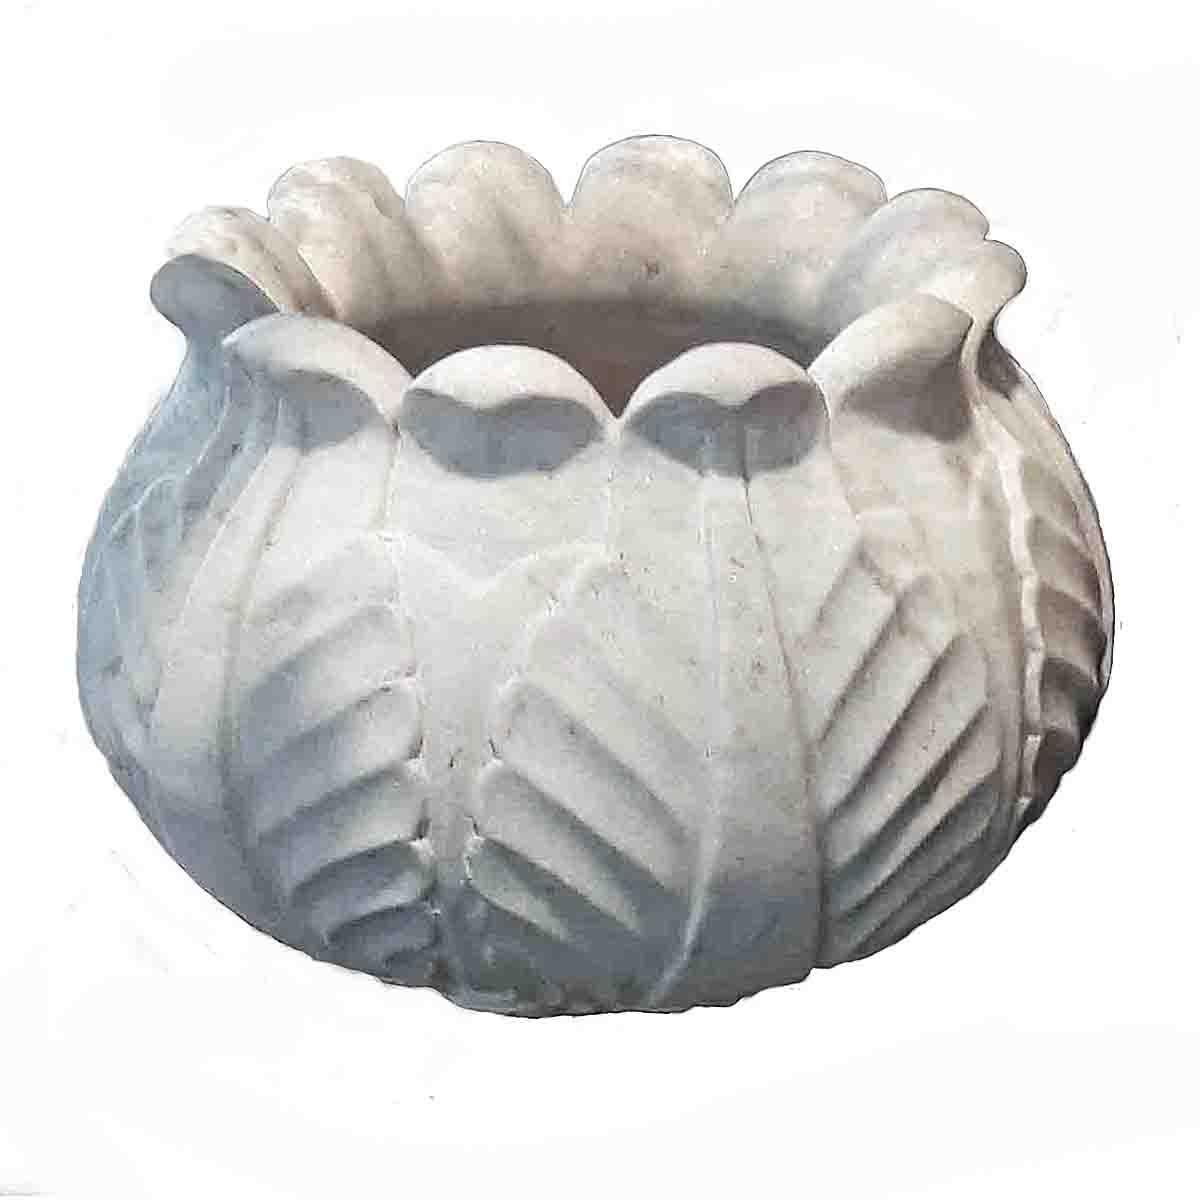 A finely carved white marble planter, circa 1970. Leaf pattern carving. Thick, solid walls. This superb planter will add a touch of timeless elegance to both interior or exterior spaces. It can also be used as a decorative large bowl.